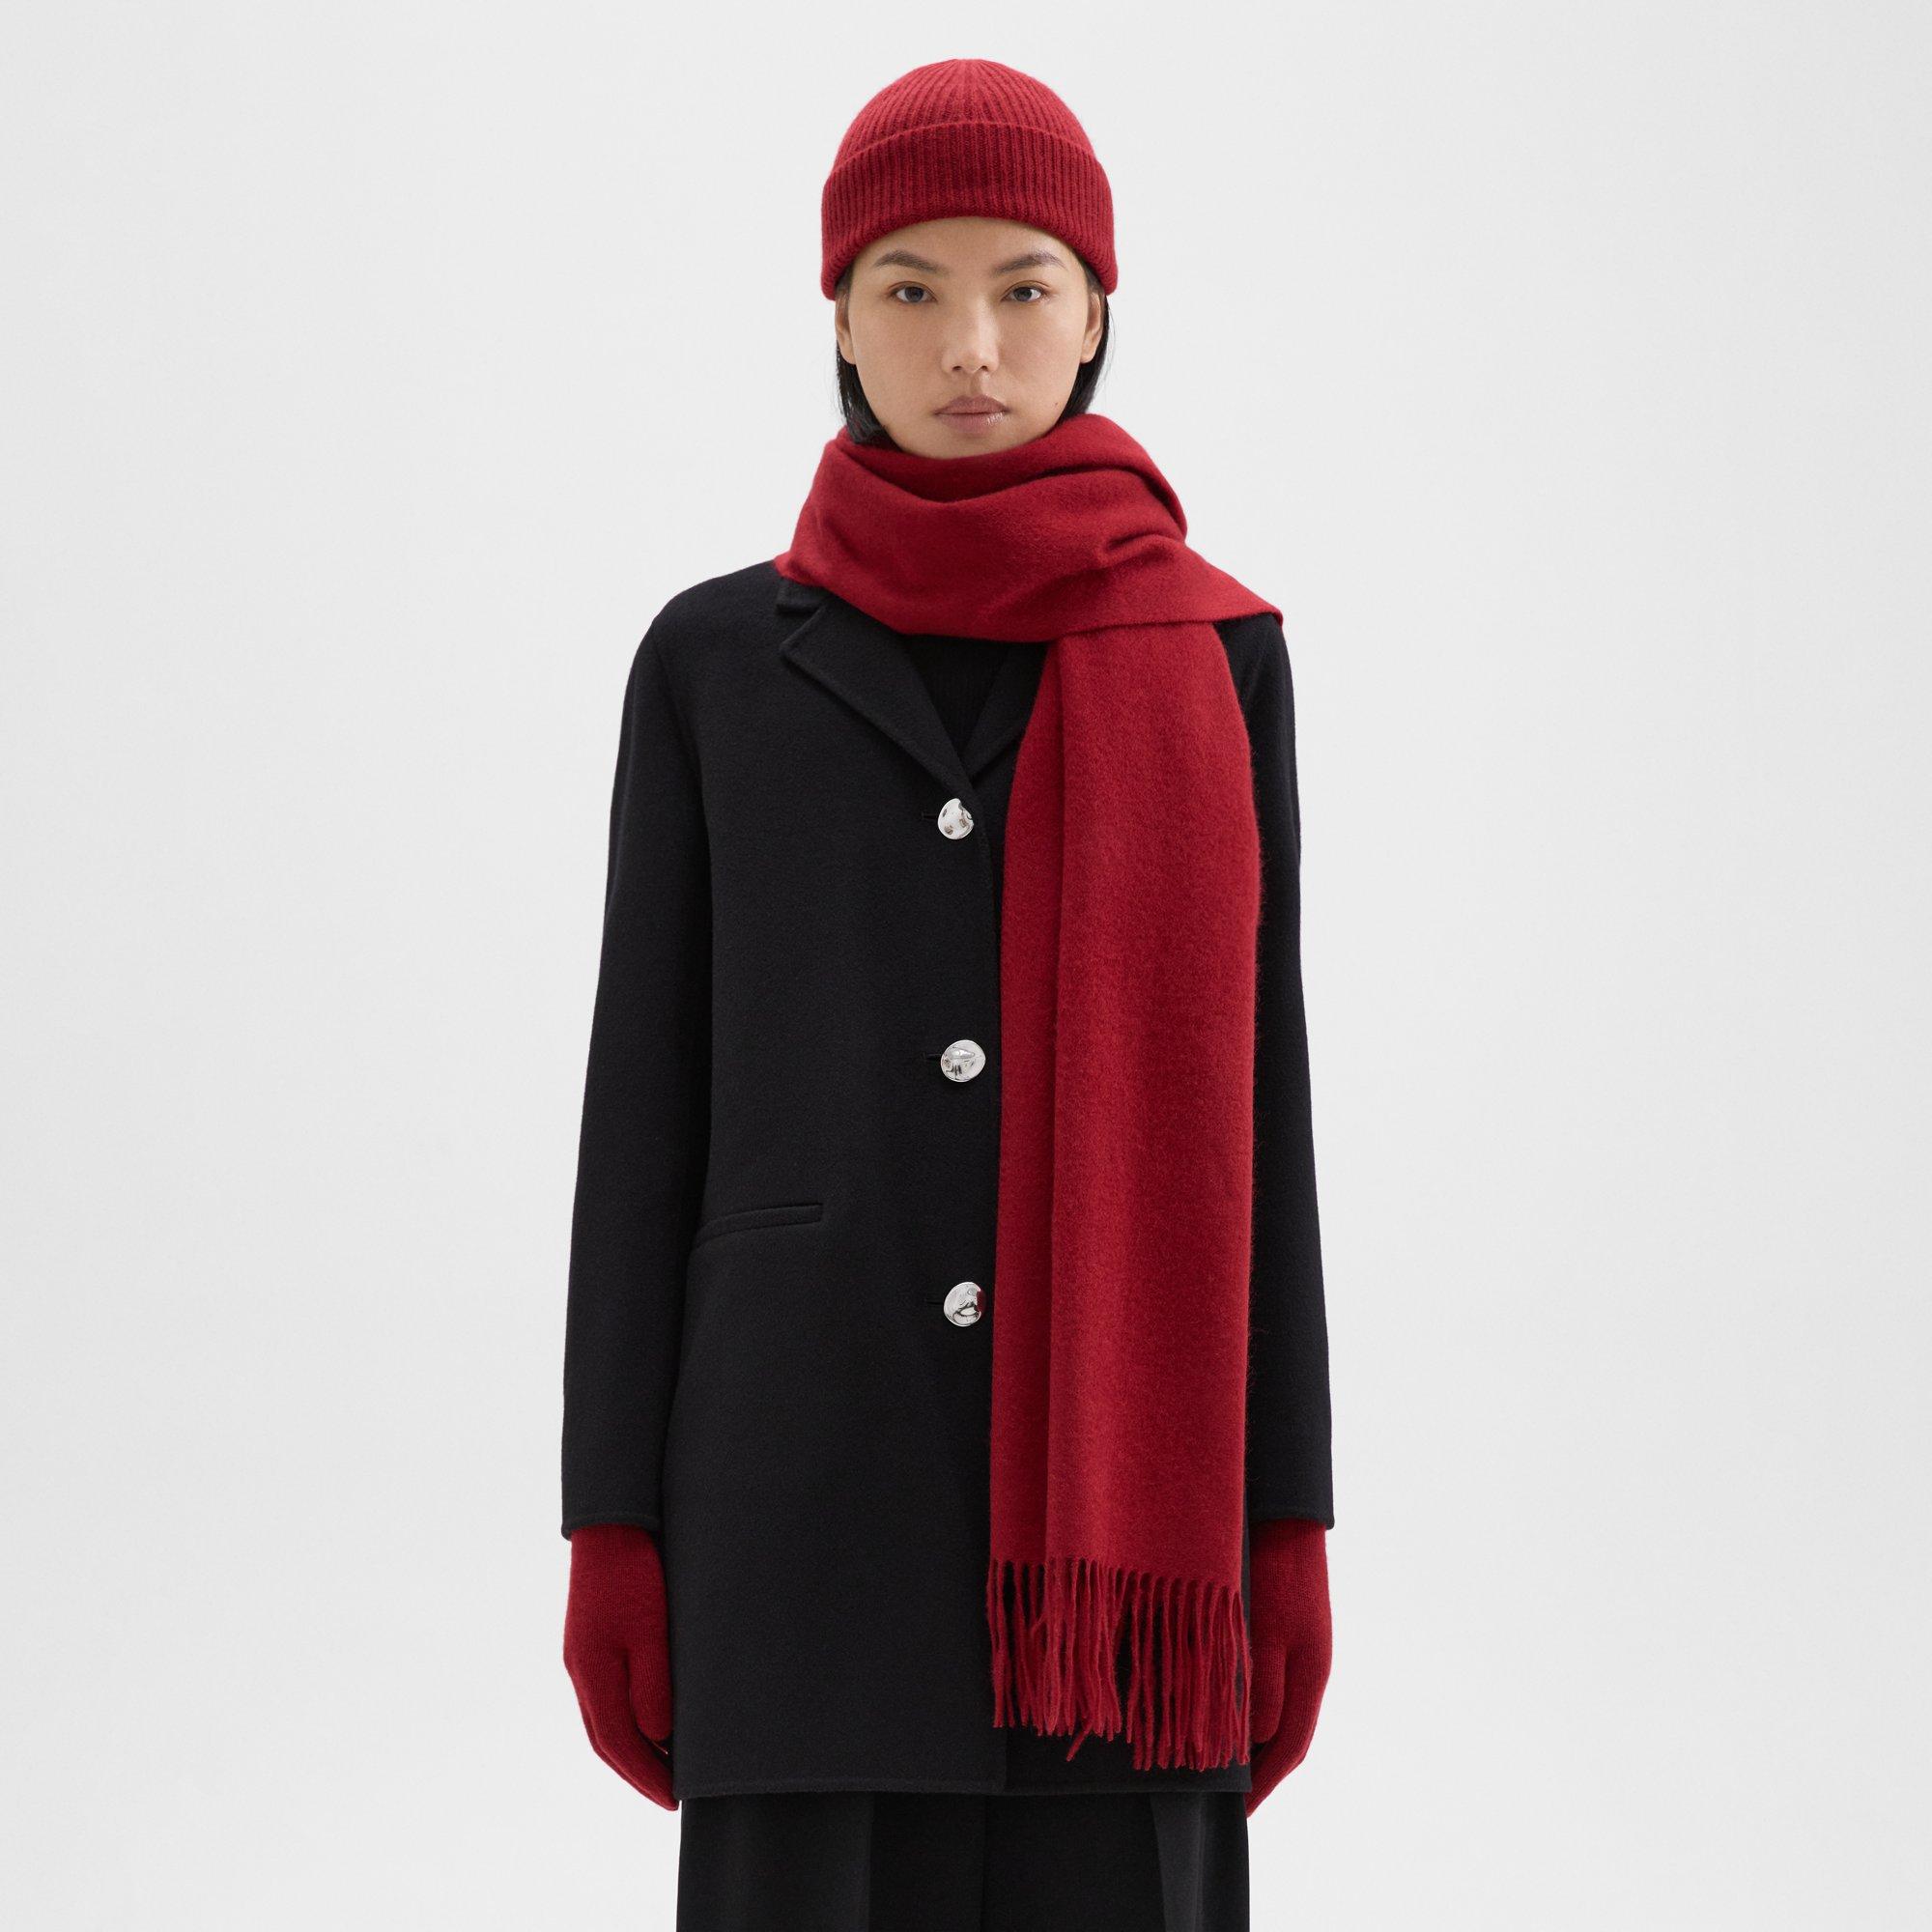 Cashmere Scarf, Hat & Gloves Set | Theory